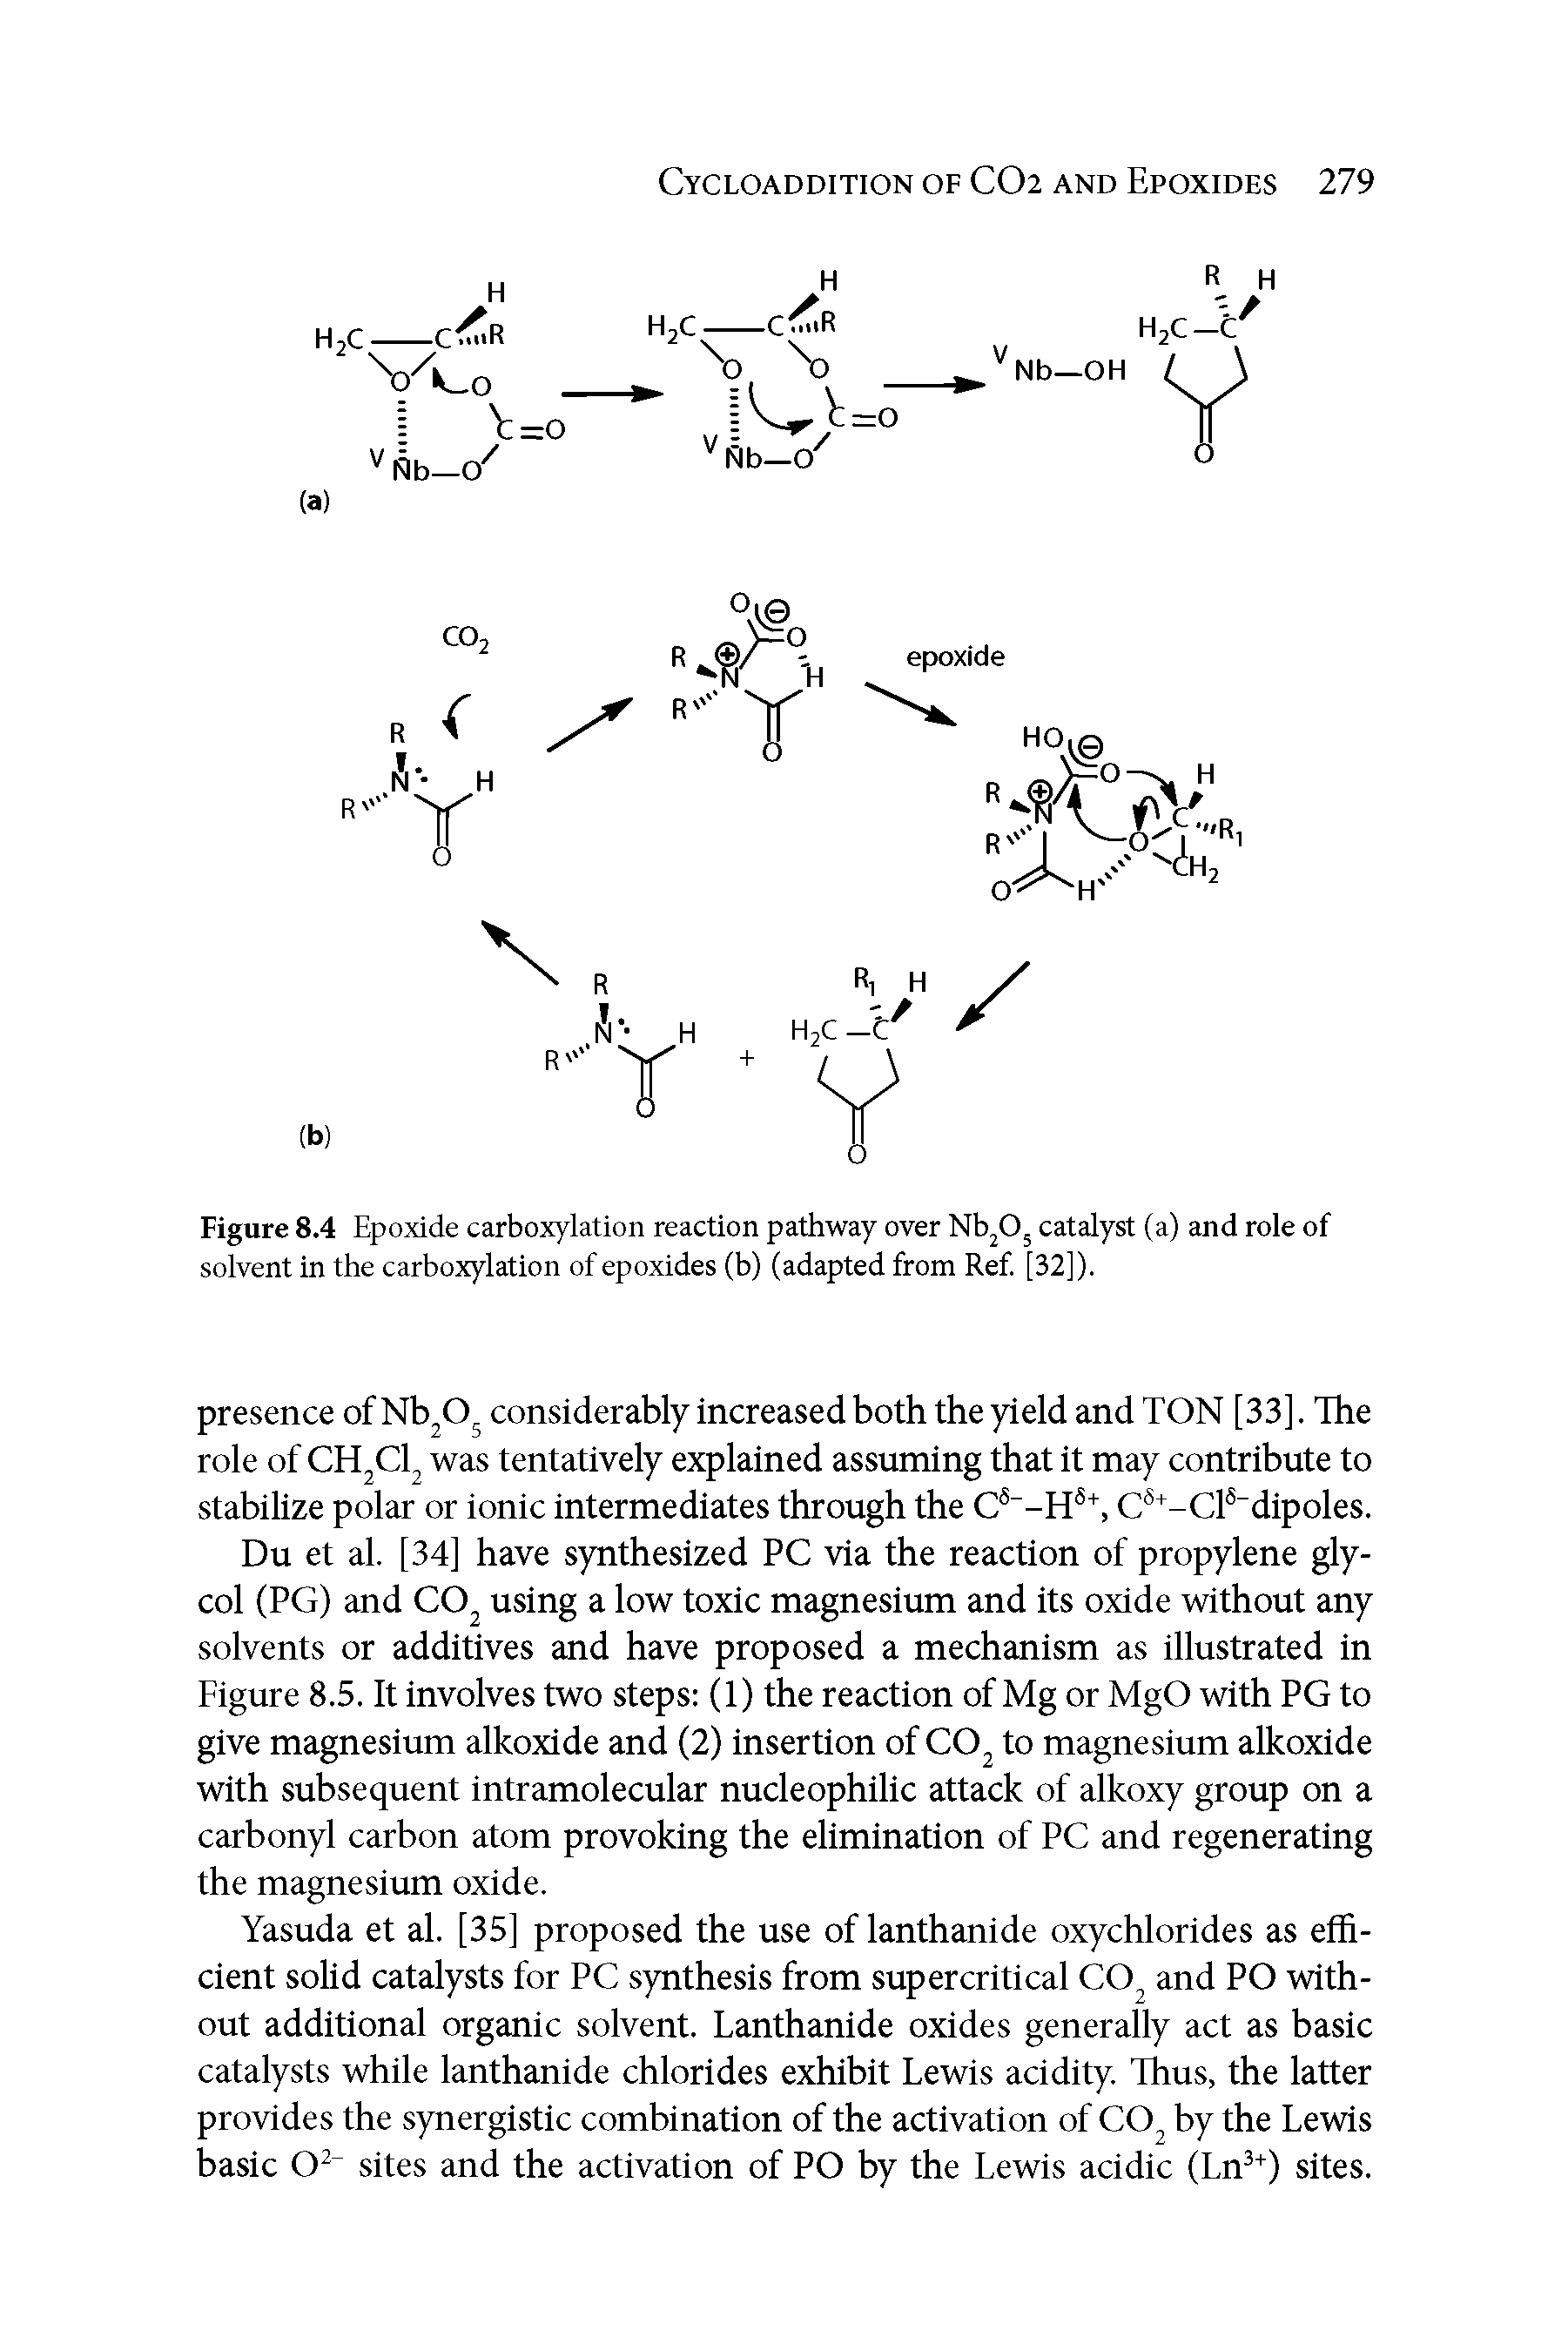 Figure 8.4 Epoxide carboxylation reaction pathway over Nb O catalyst (a) and role of solvent in the carboxylation of epoxides (b) (adapted from Ref. [32]).